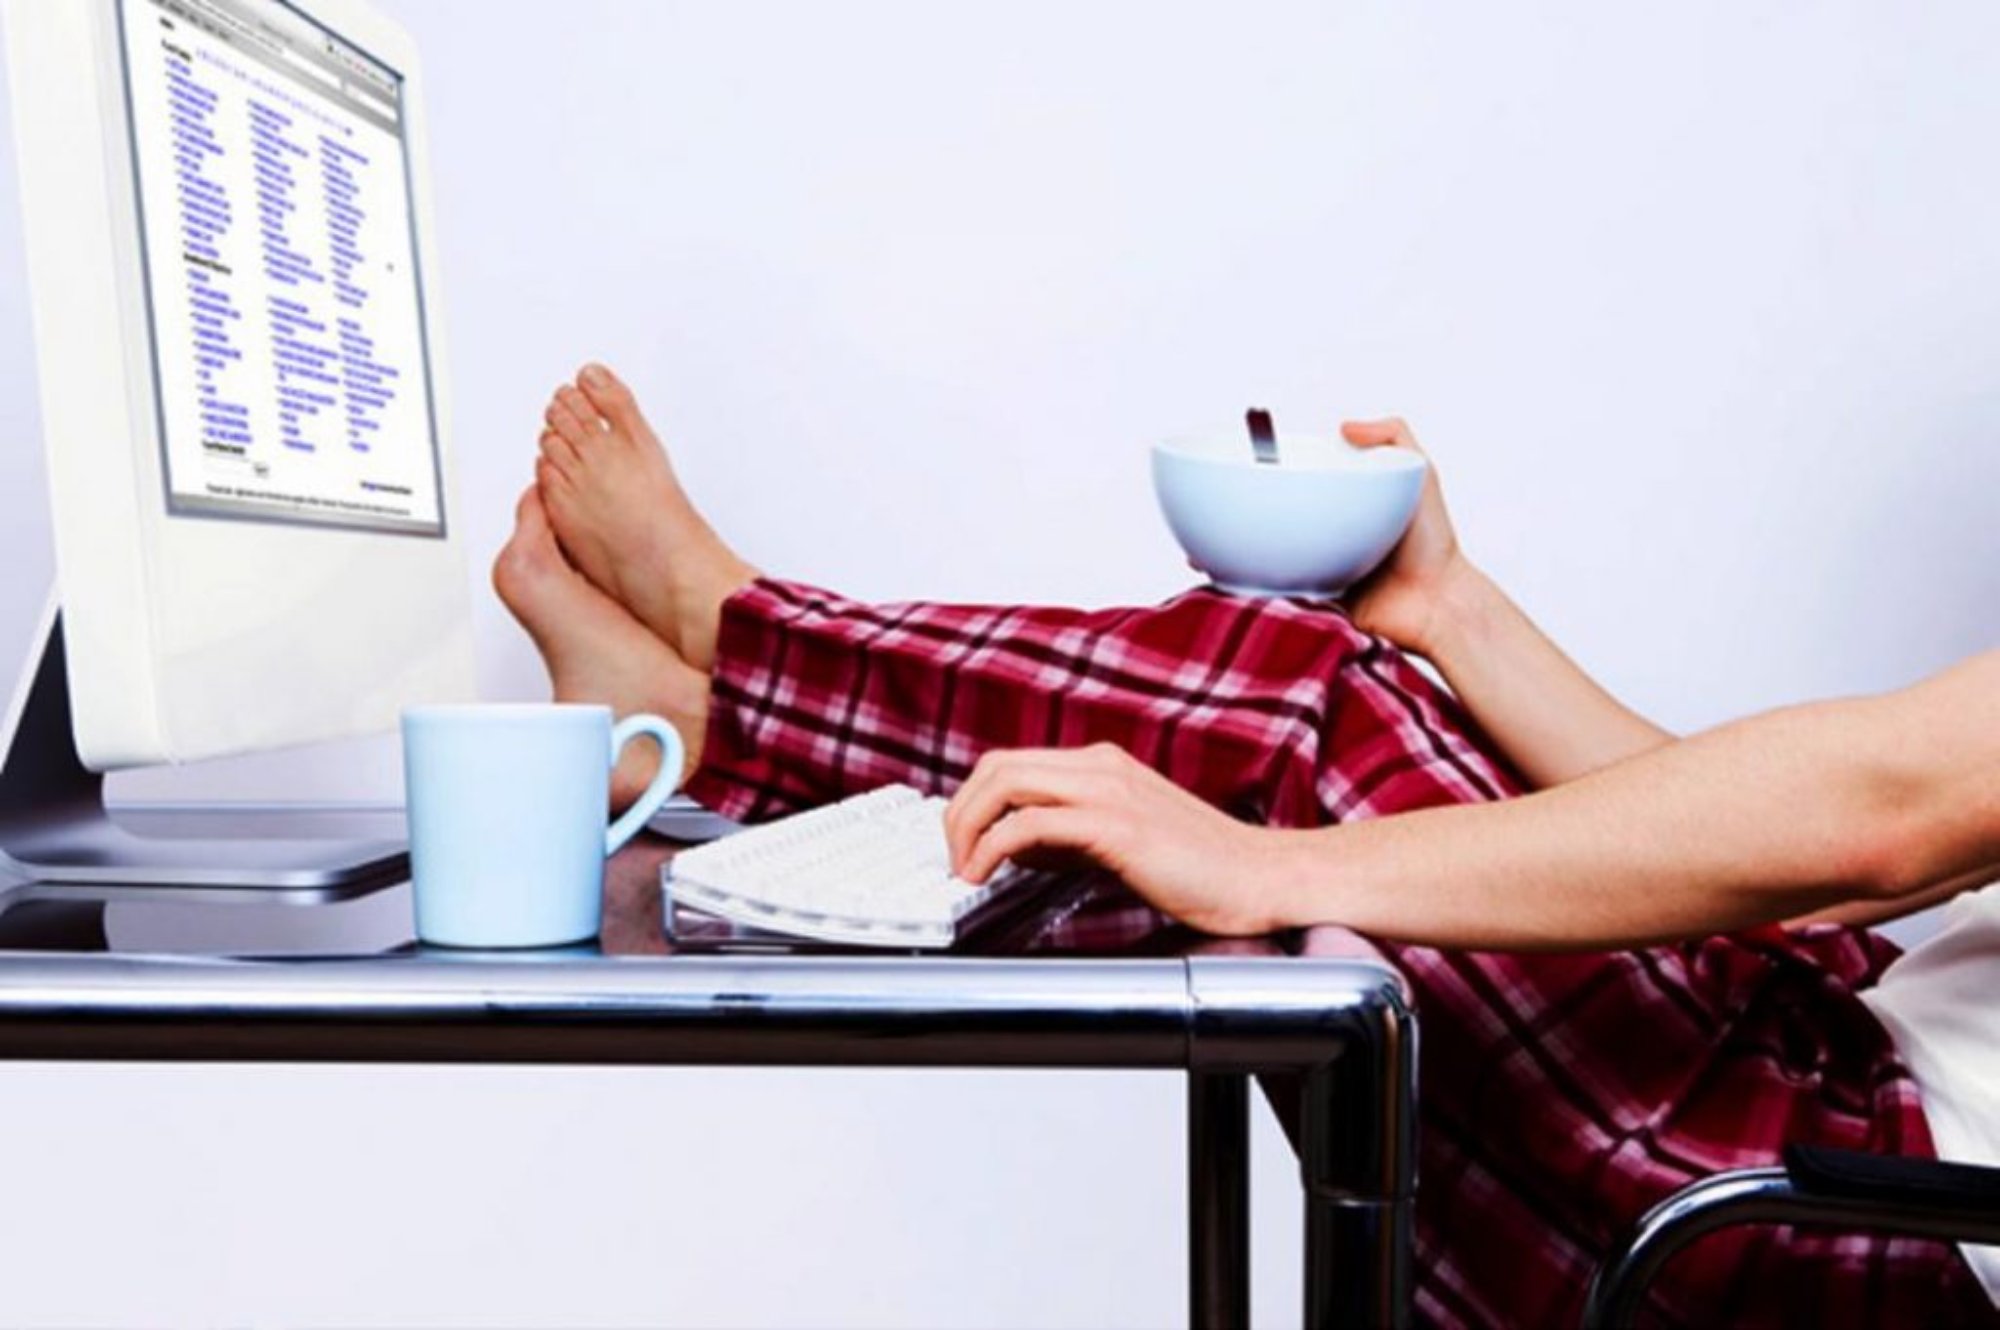 Job tips: 10-plus work-from-home jobs that pay well